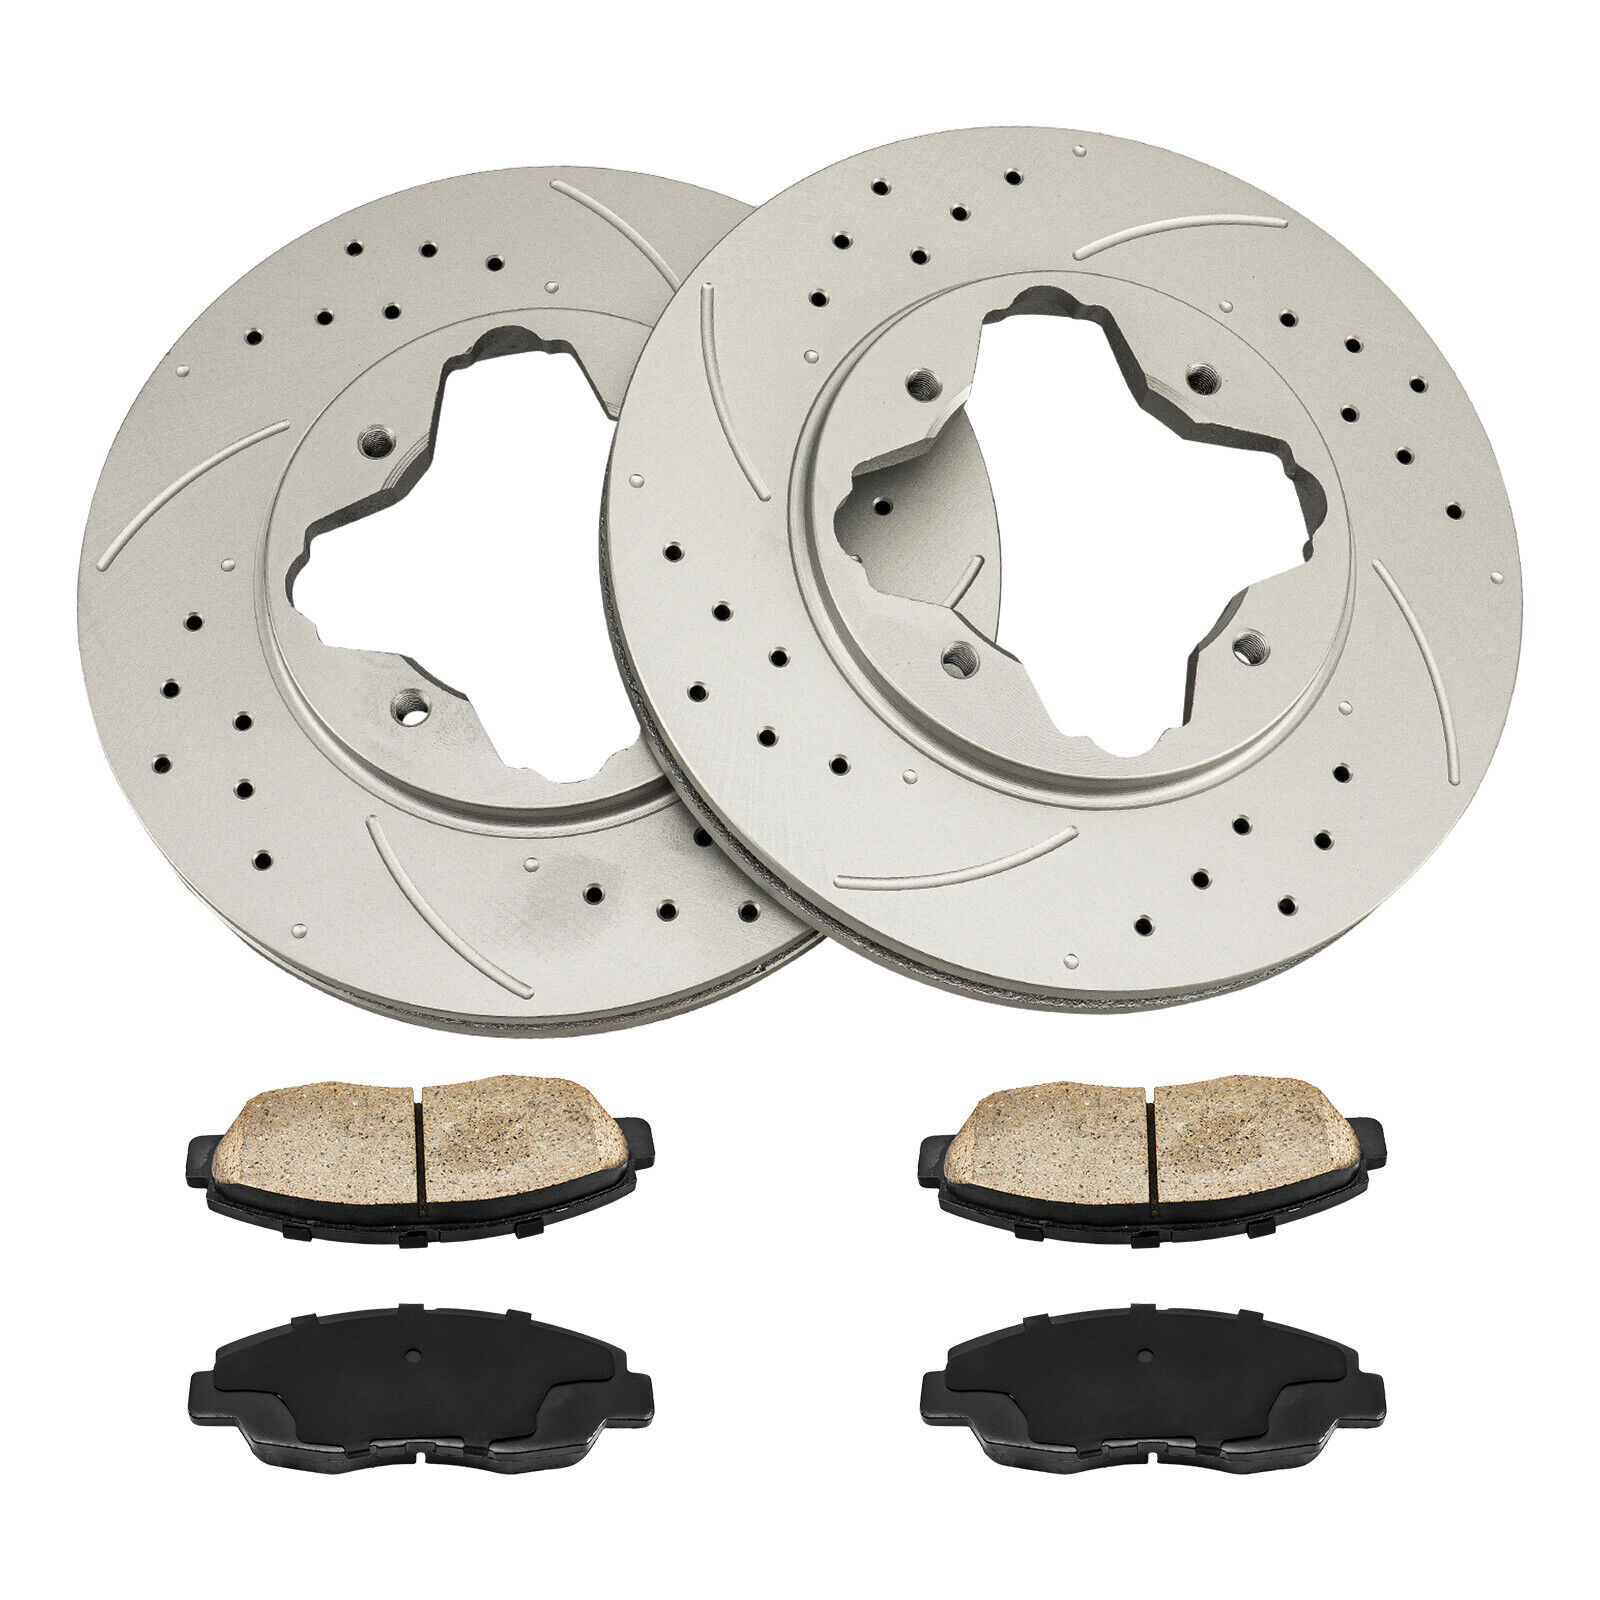 Front Drilled Brake Rotors W/ Ceramic Pads For 1990-1997 Honda Accord Acura CL